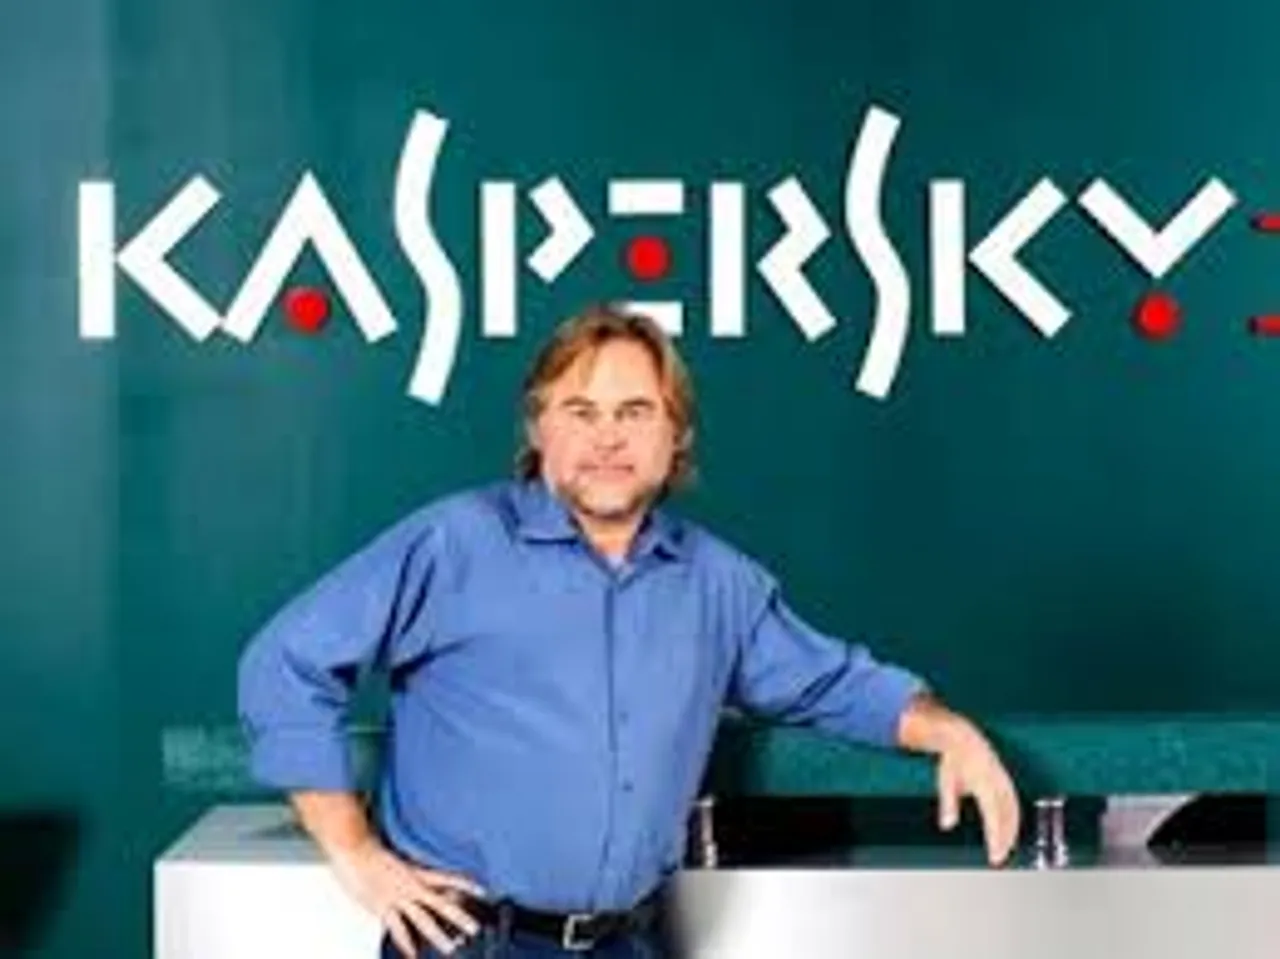 Kaspersky strengthens its global network with Singapore office